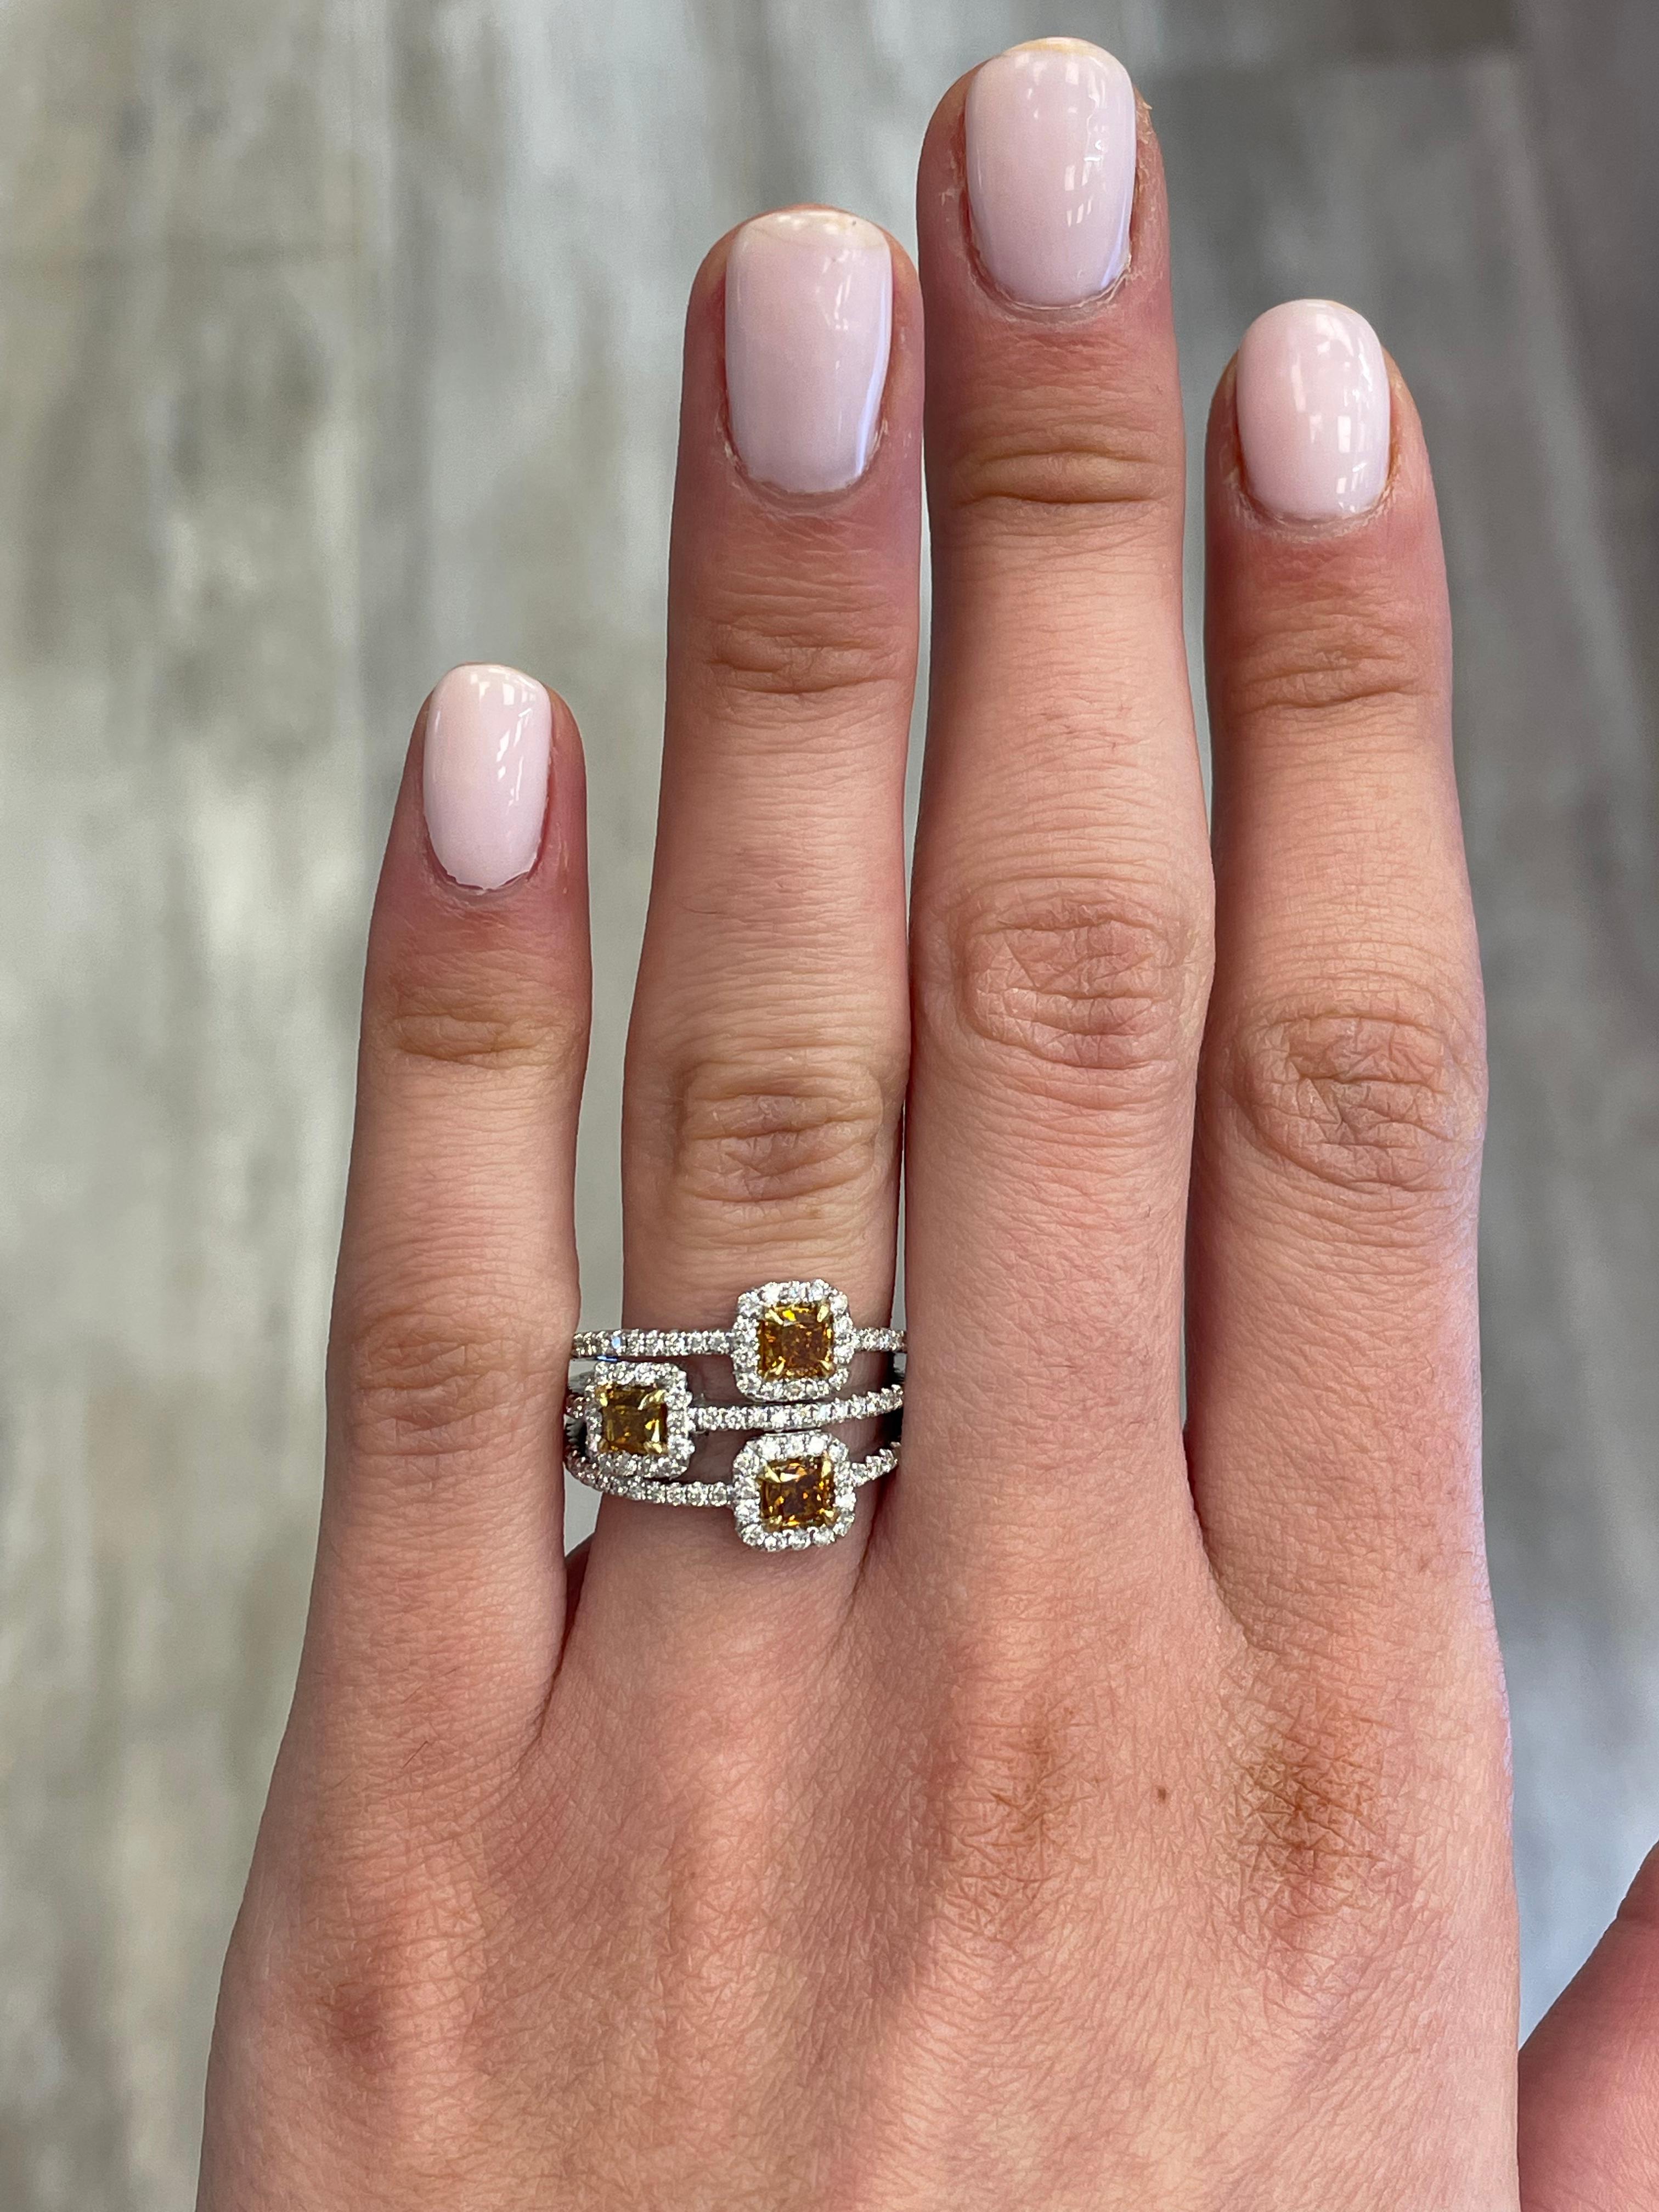 Stunning modern yellow diamond cocktail ring. High jewelry by Alexander Beverly Hills.
1.65 carats total diamond weight.
3 cushion diamonds, 1.01 carats. Approximately Fancy Intense Brownish Orangey Yellow color. Complimented by 105 round brilliant